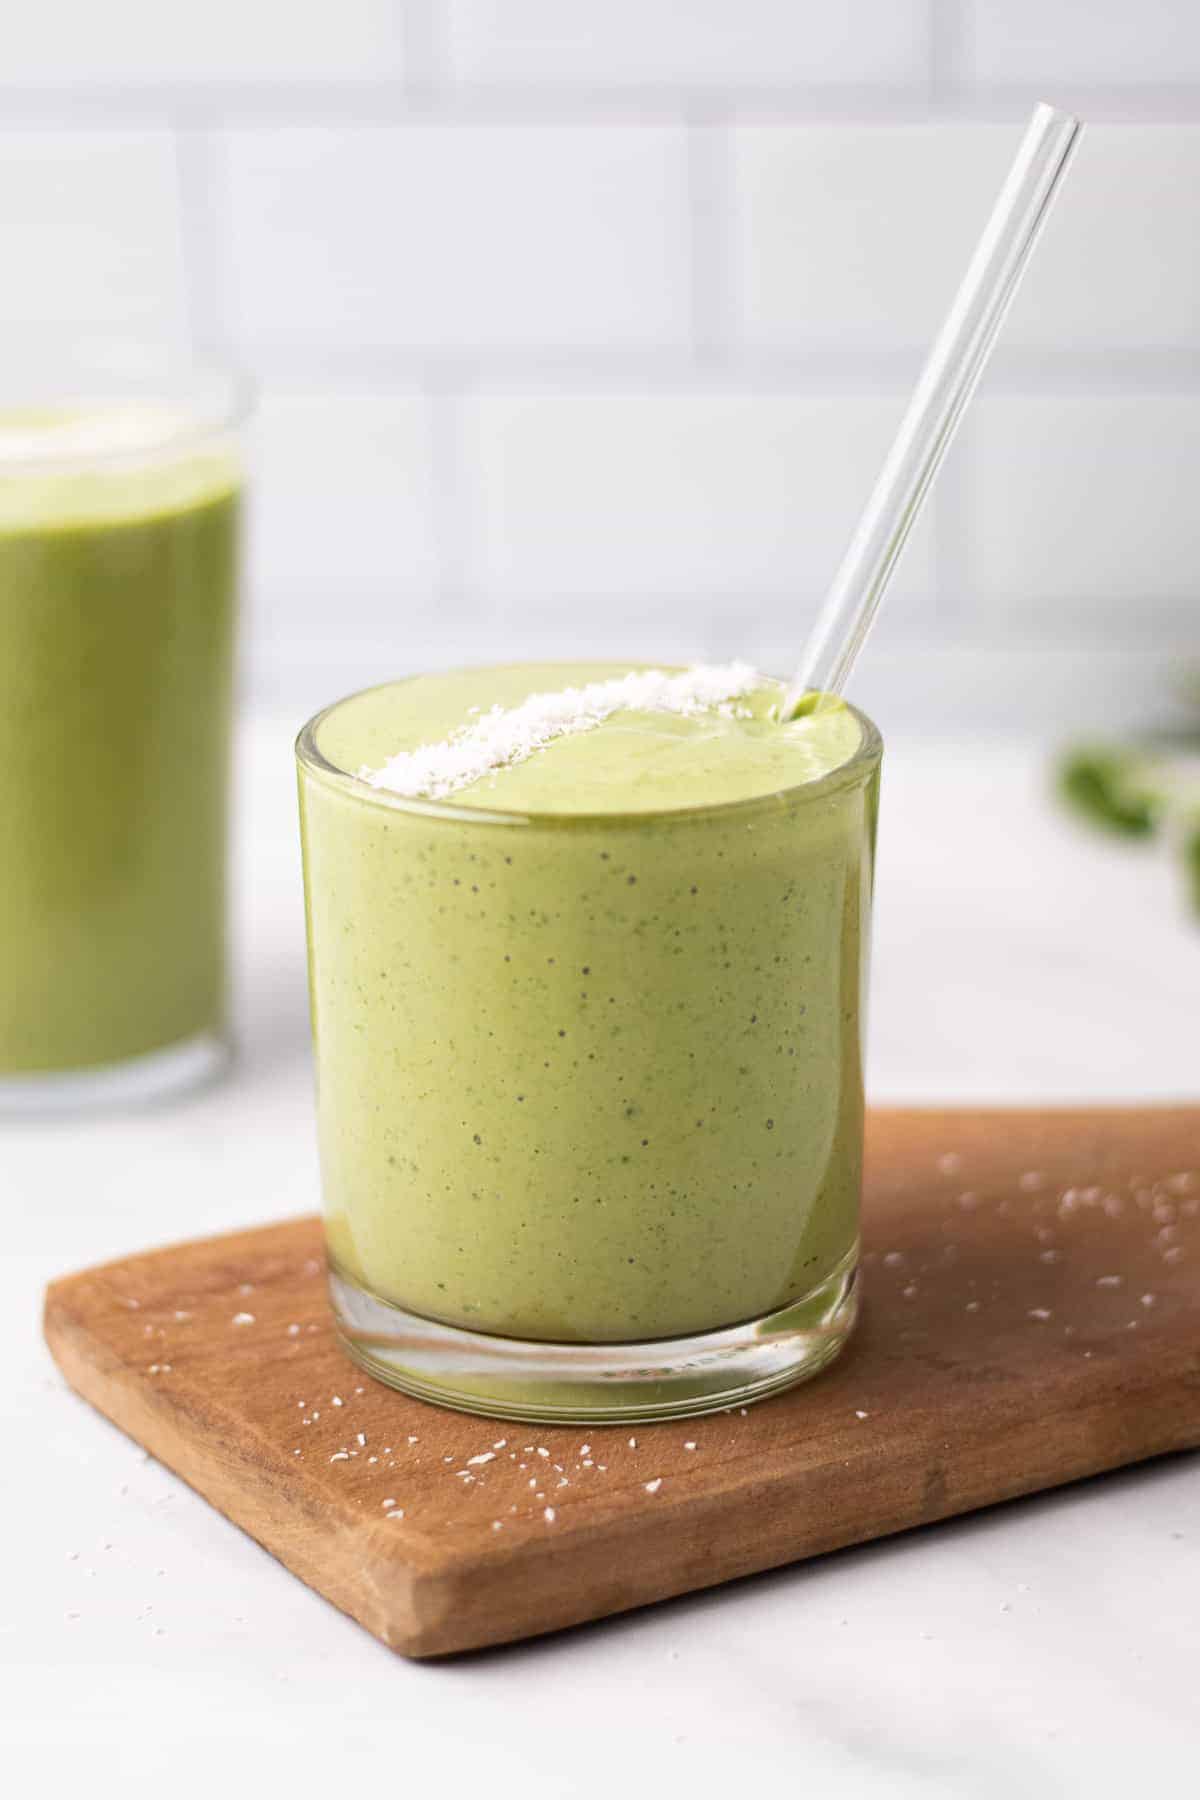 Green smoothie in a glass with a straw, topped with fine coconut, sitting on a wooden cutting board